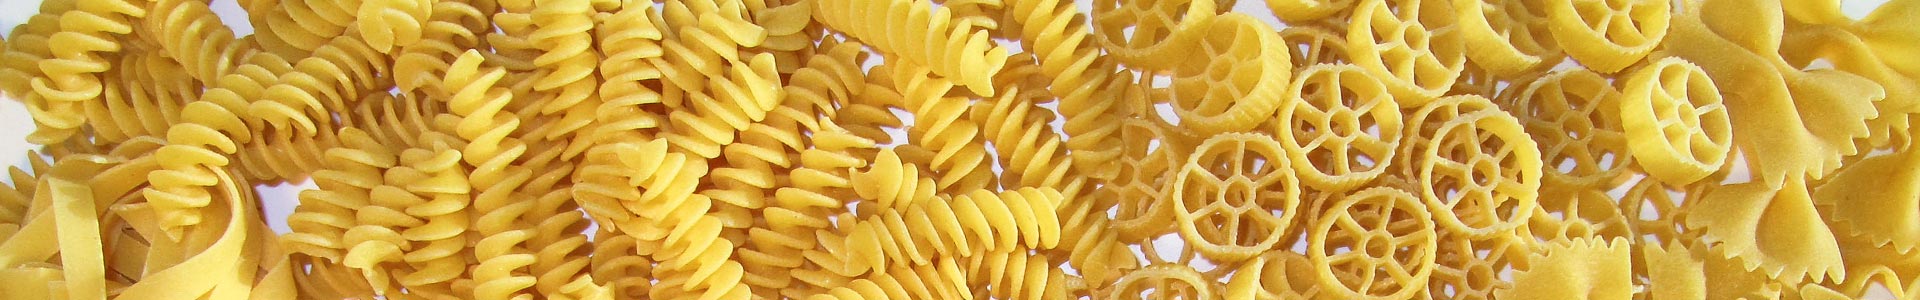 Engineering & machineries for food industry | semi automatic lines for short and long cut pasta